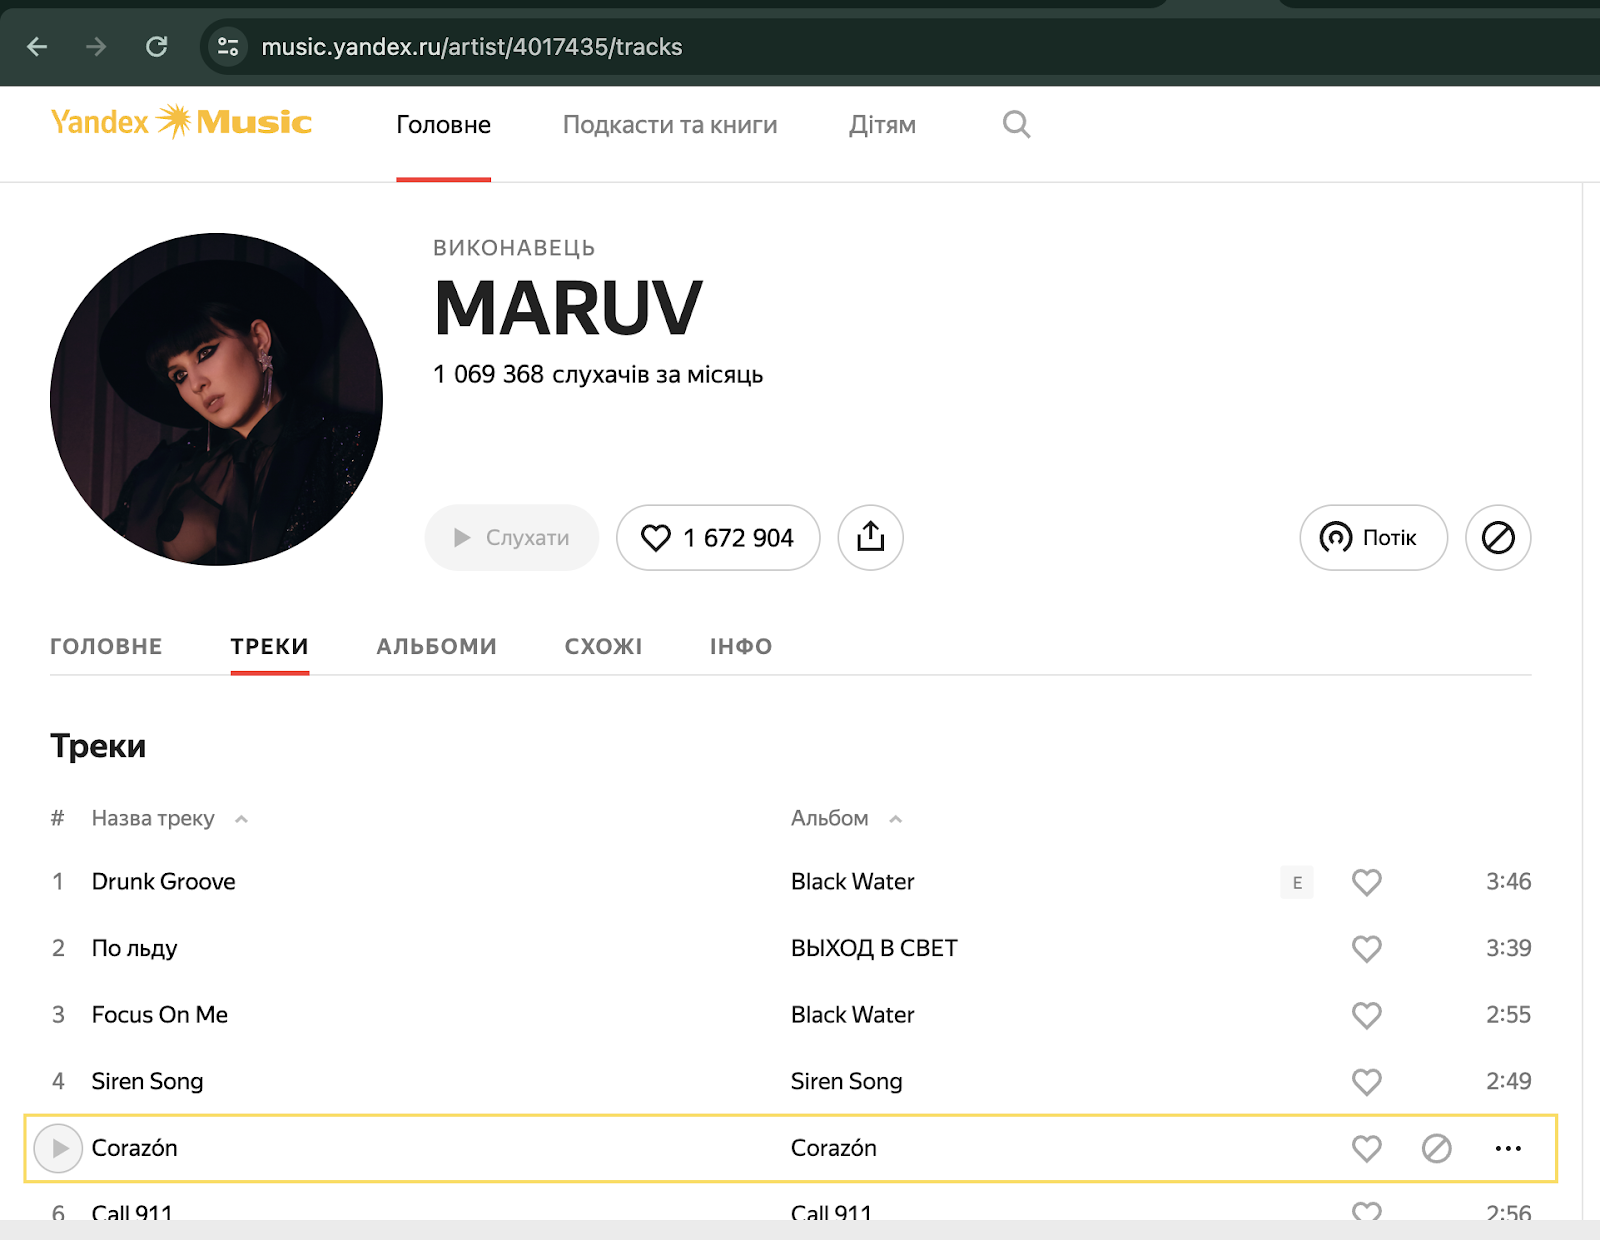 the number of monthly listens Maruv gets on the Yandex Music screenshot